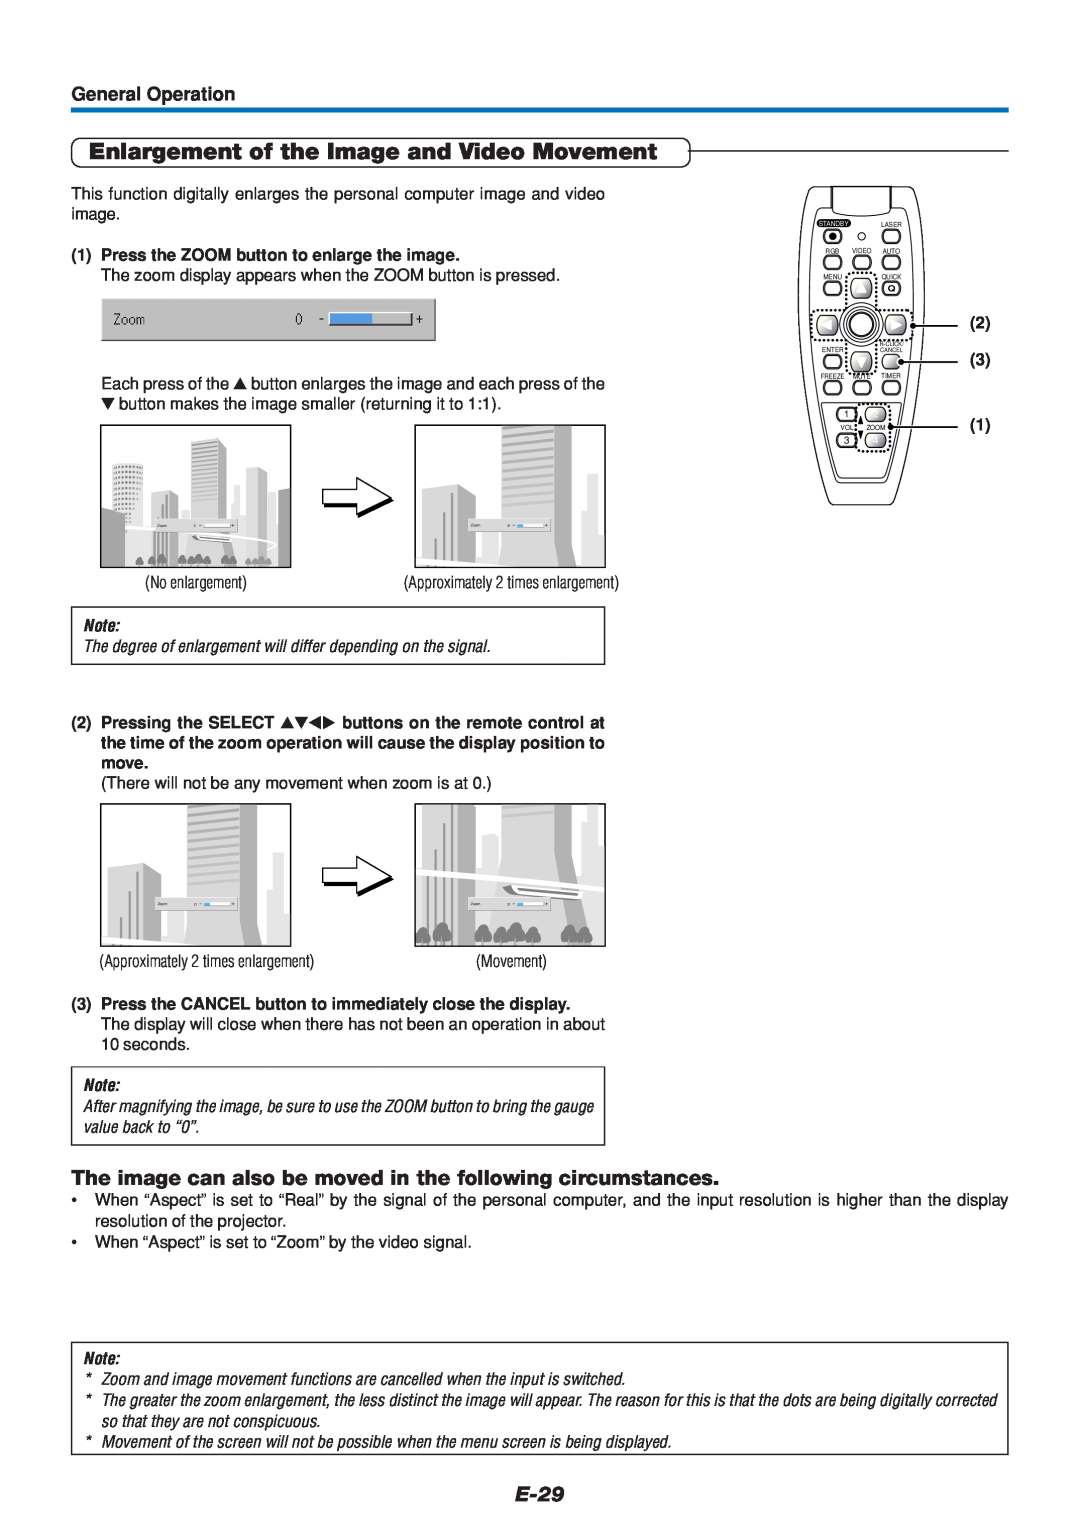 Mitsubishi Electronics DATA PROJECTOR user manual Enlargement of the Image and Video Movement, E-29, General Operation 